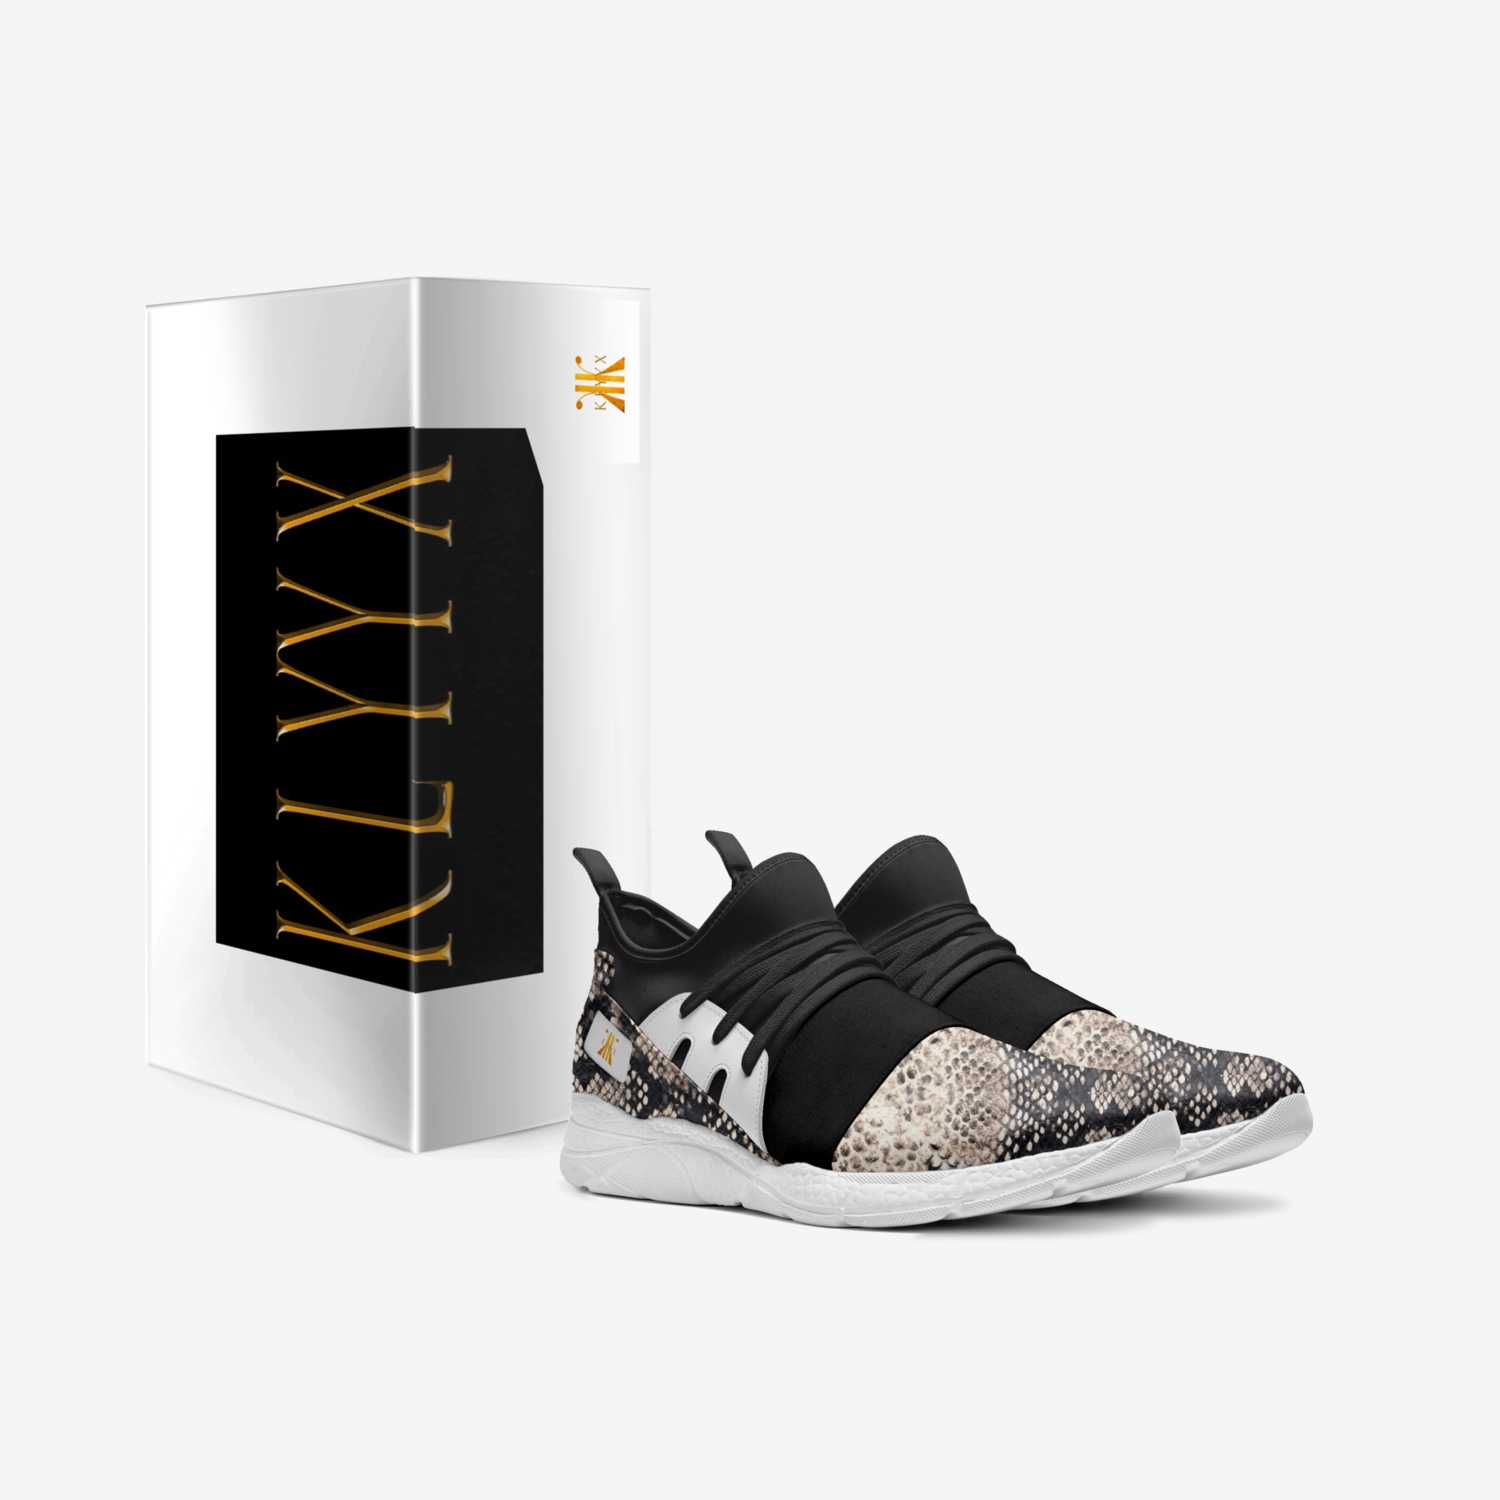 KLYYX 3 custom made in Italy shoes by Wendell Hawkins | Box view